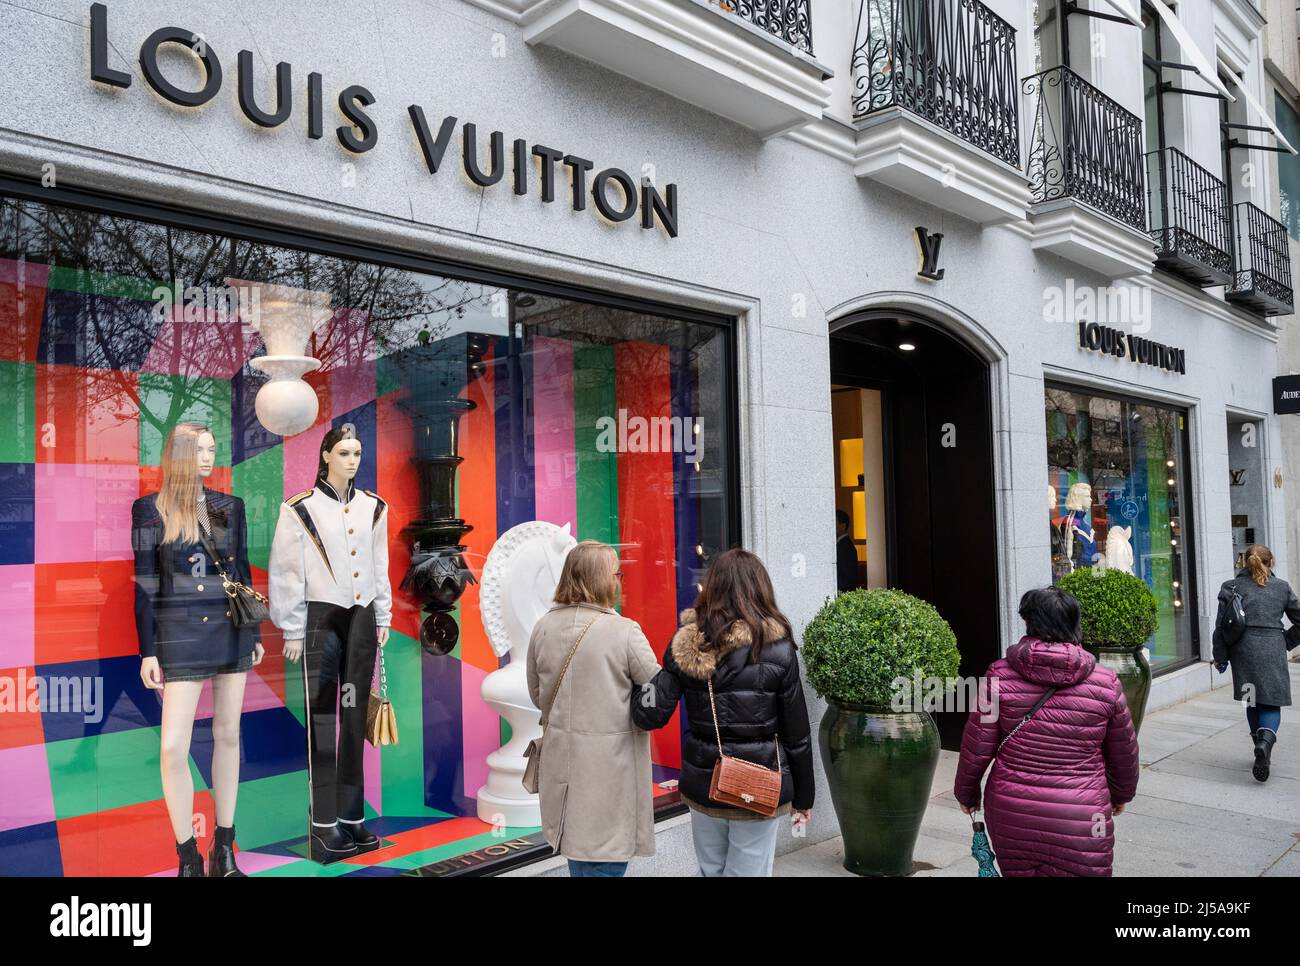 People seen waiting outside the Louis Vuitton in London, during the third  nationwide lockdown.Louis Vuitton Malletier, commonly known as Louis  Vuitton or shortened to LV, is a French fashion house and luxury